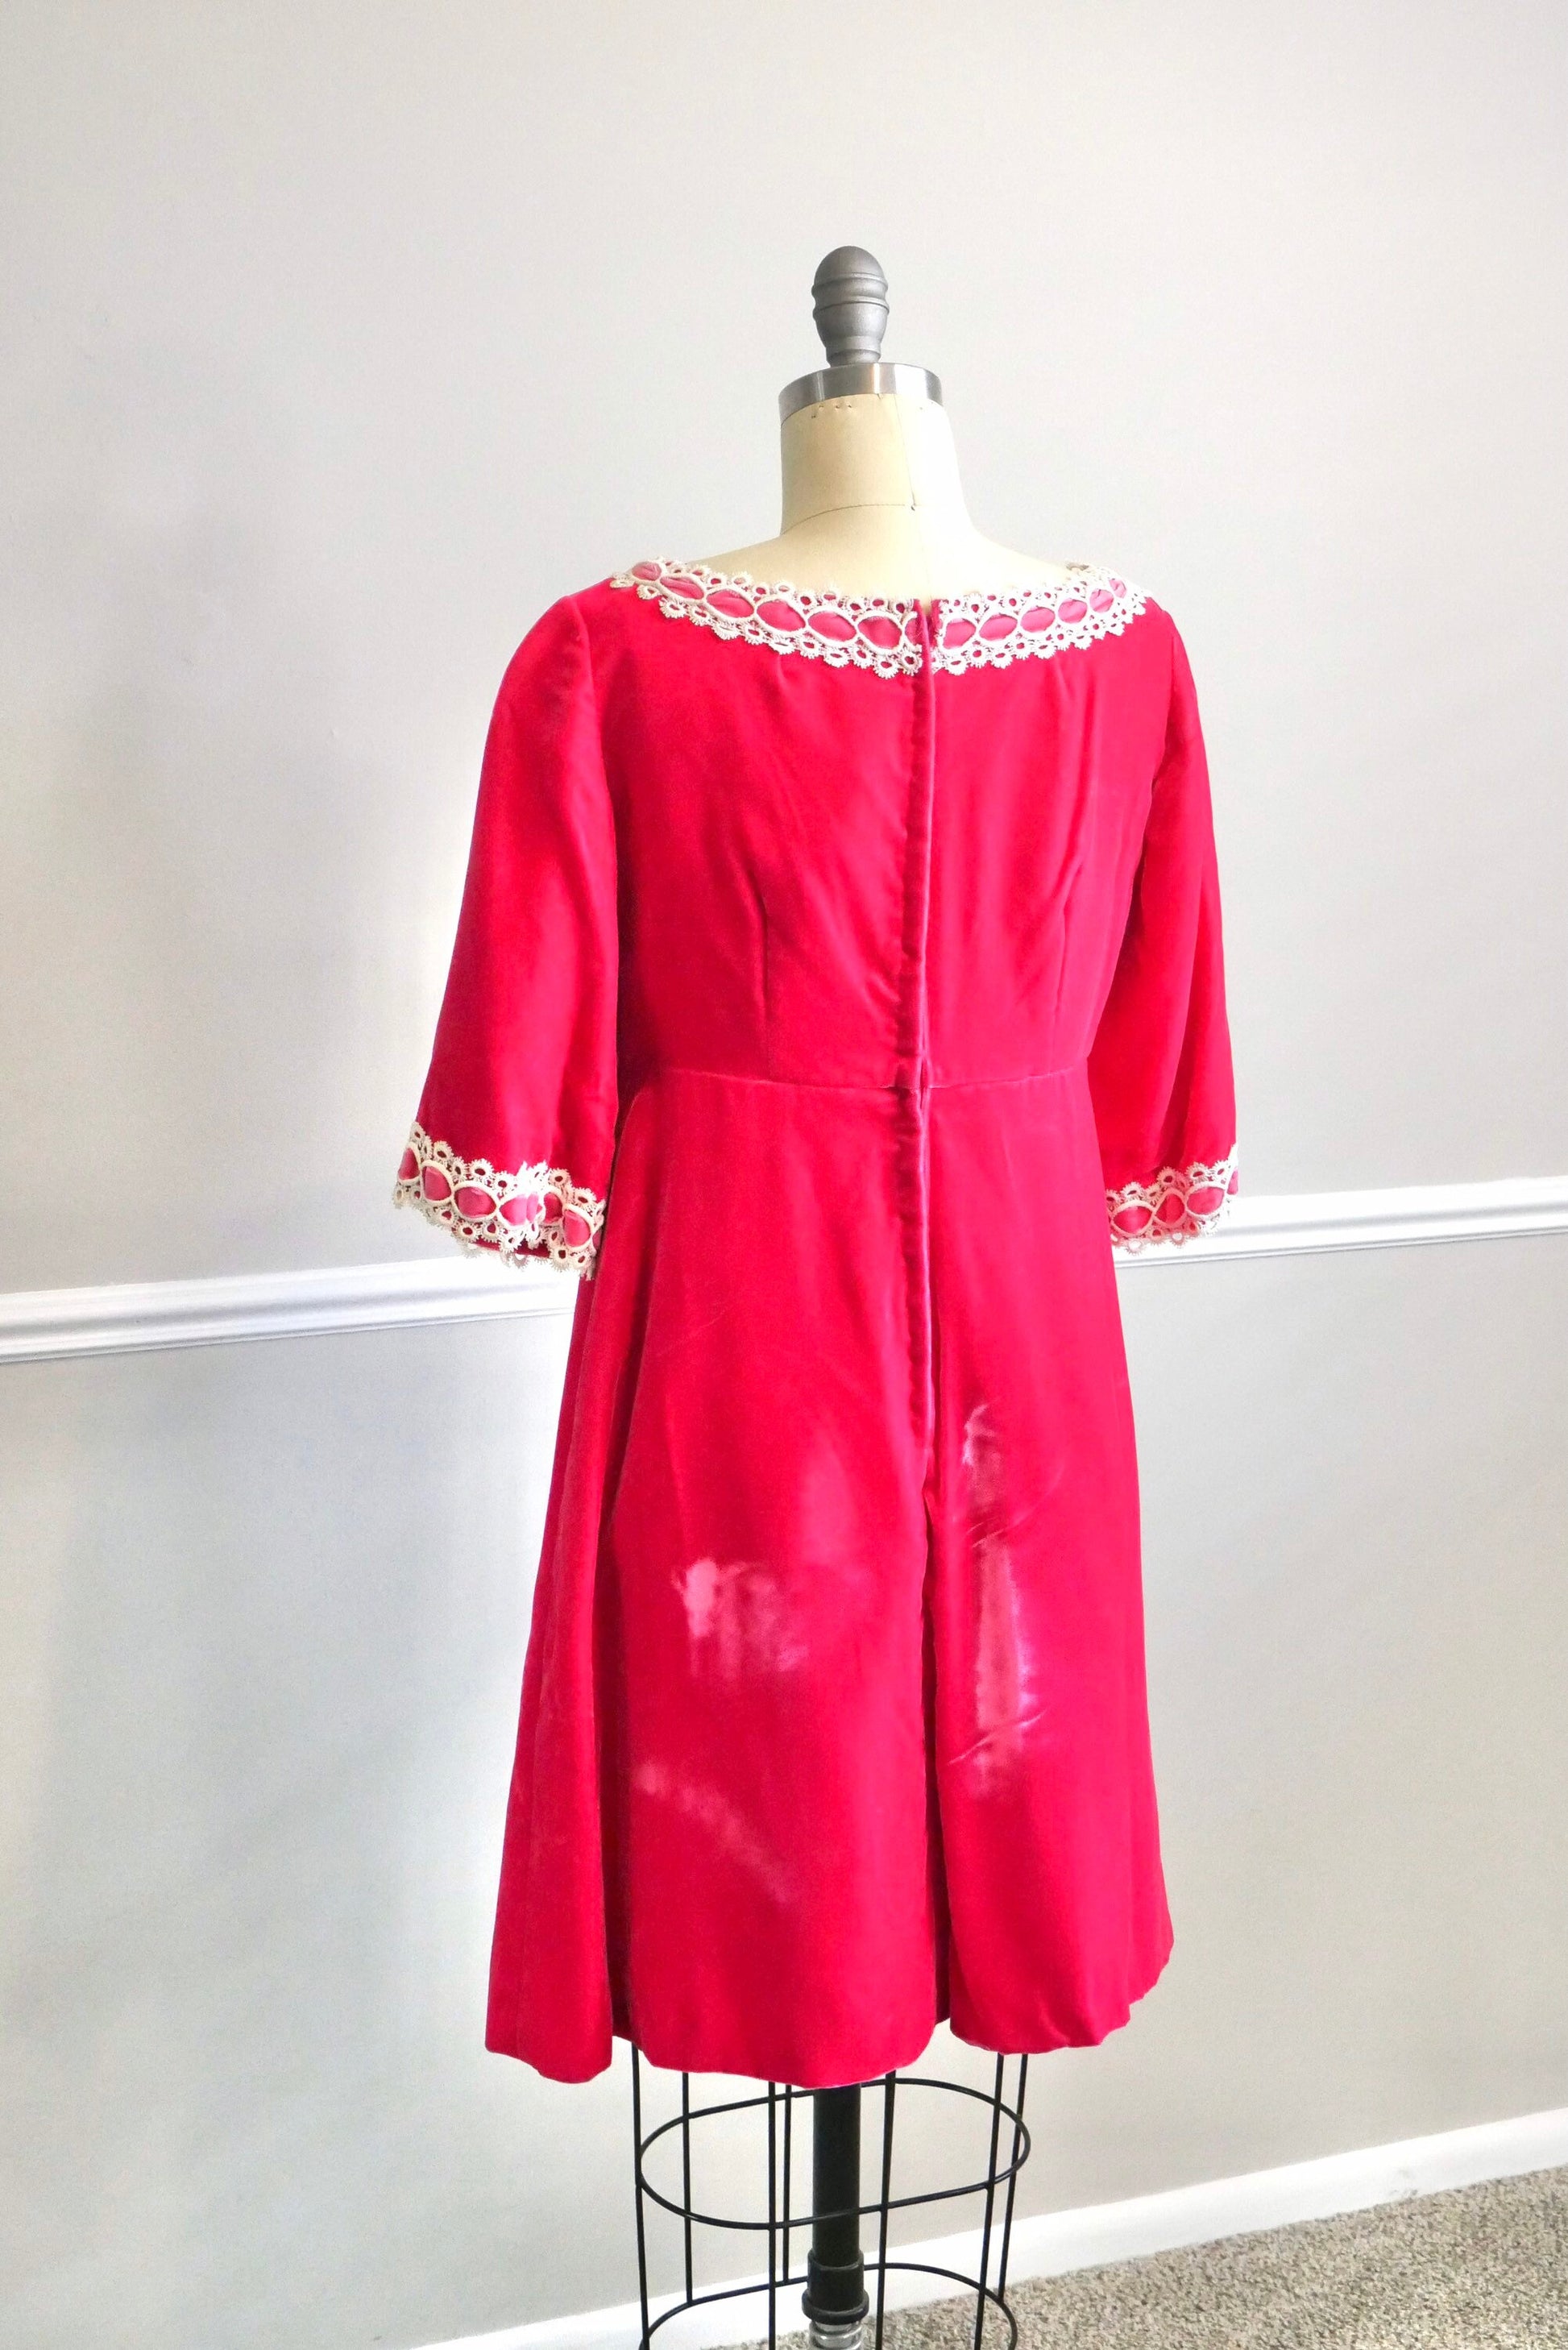 Vintage late 1960s Hot Pink Velvet Mini Dress / retro babydoll empire waist party holiday scooter dress size XS S